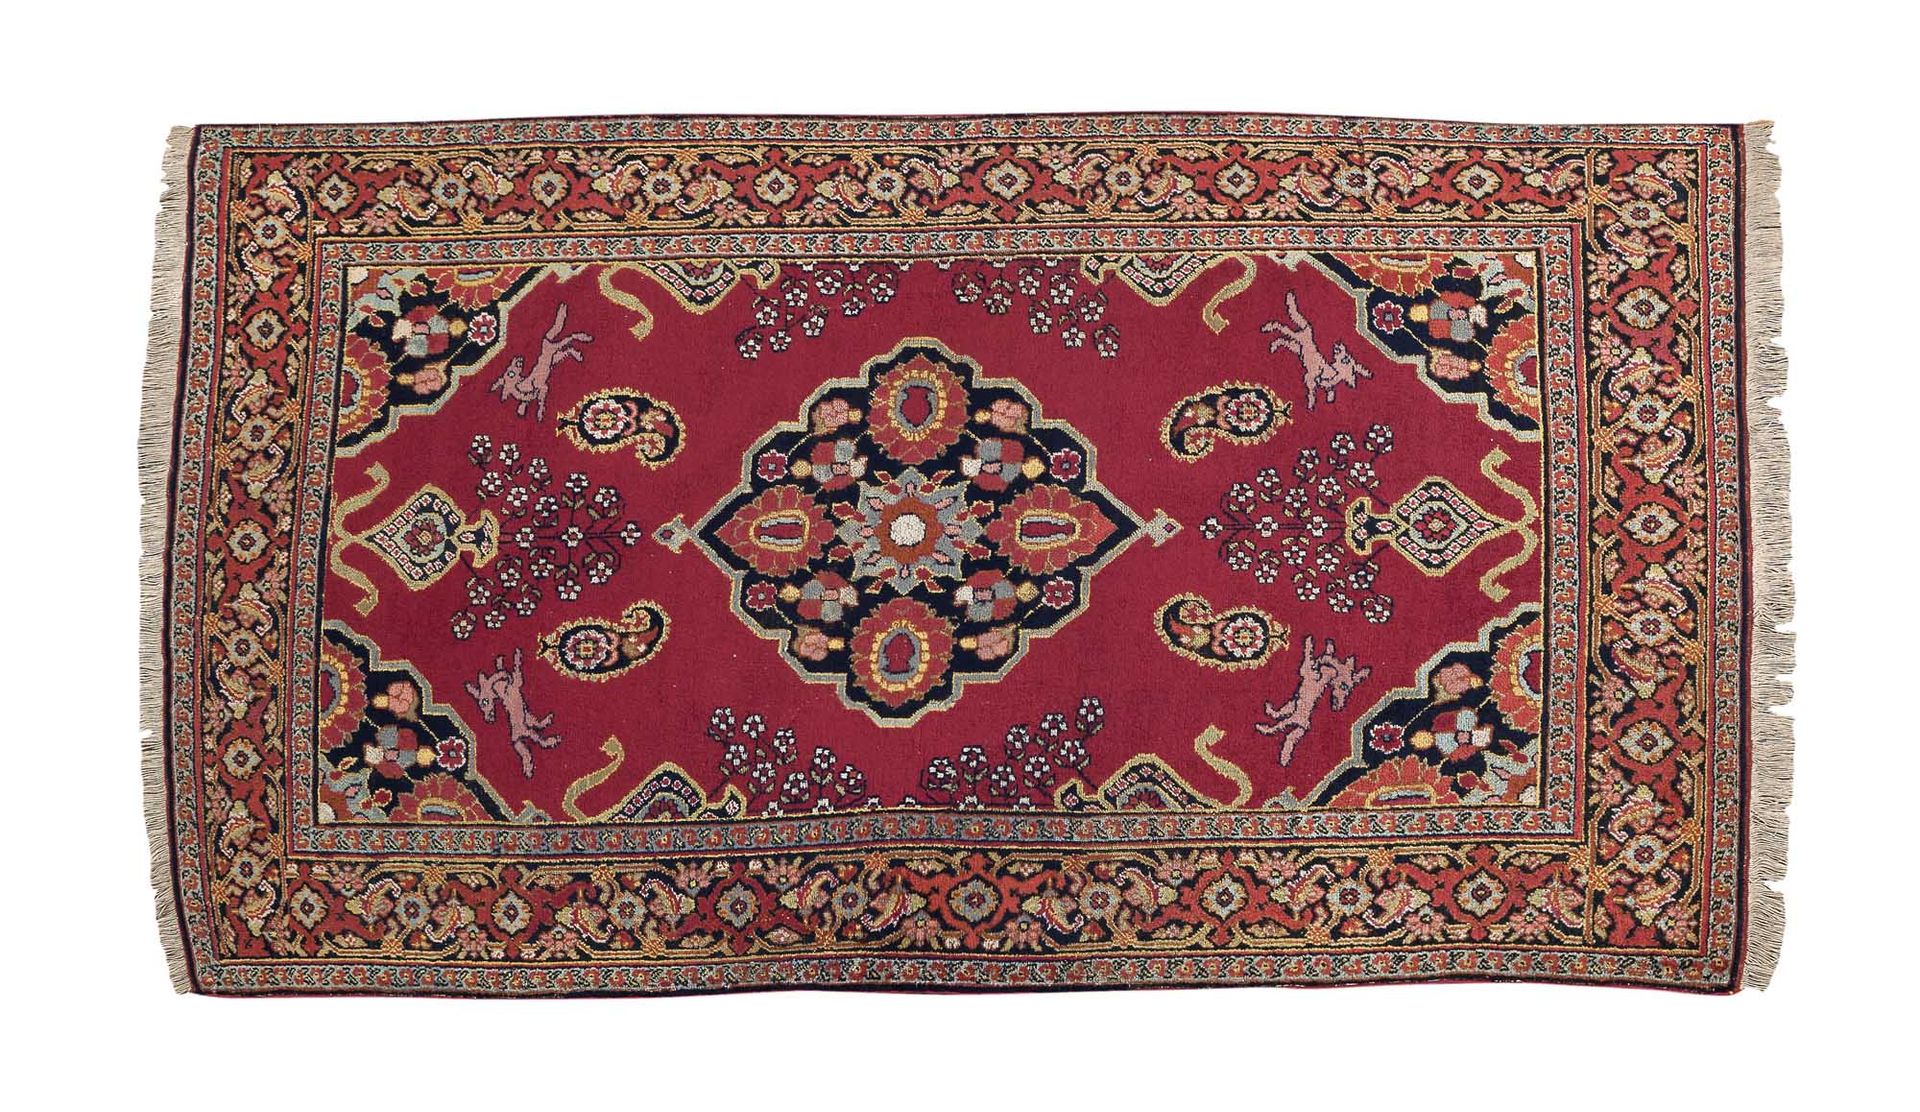 Null Carpet KHORASSAN (Persia), 2nd part of the 19th century

Dimensions : 200 x&hellip;